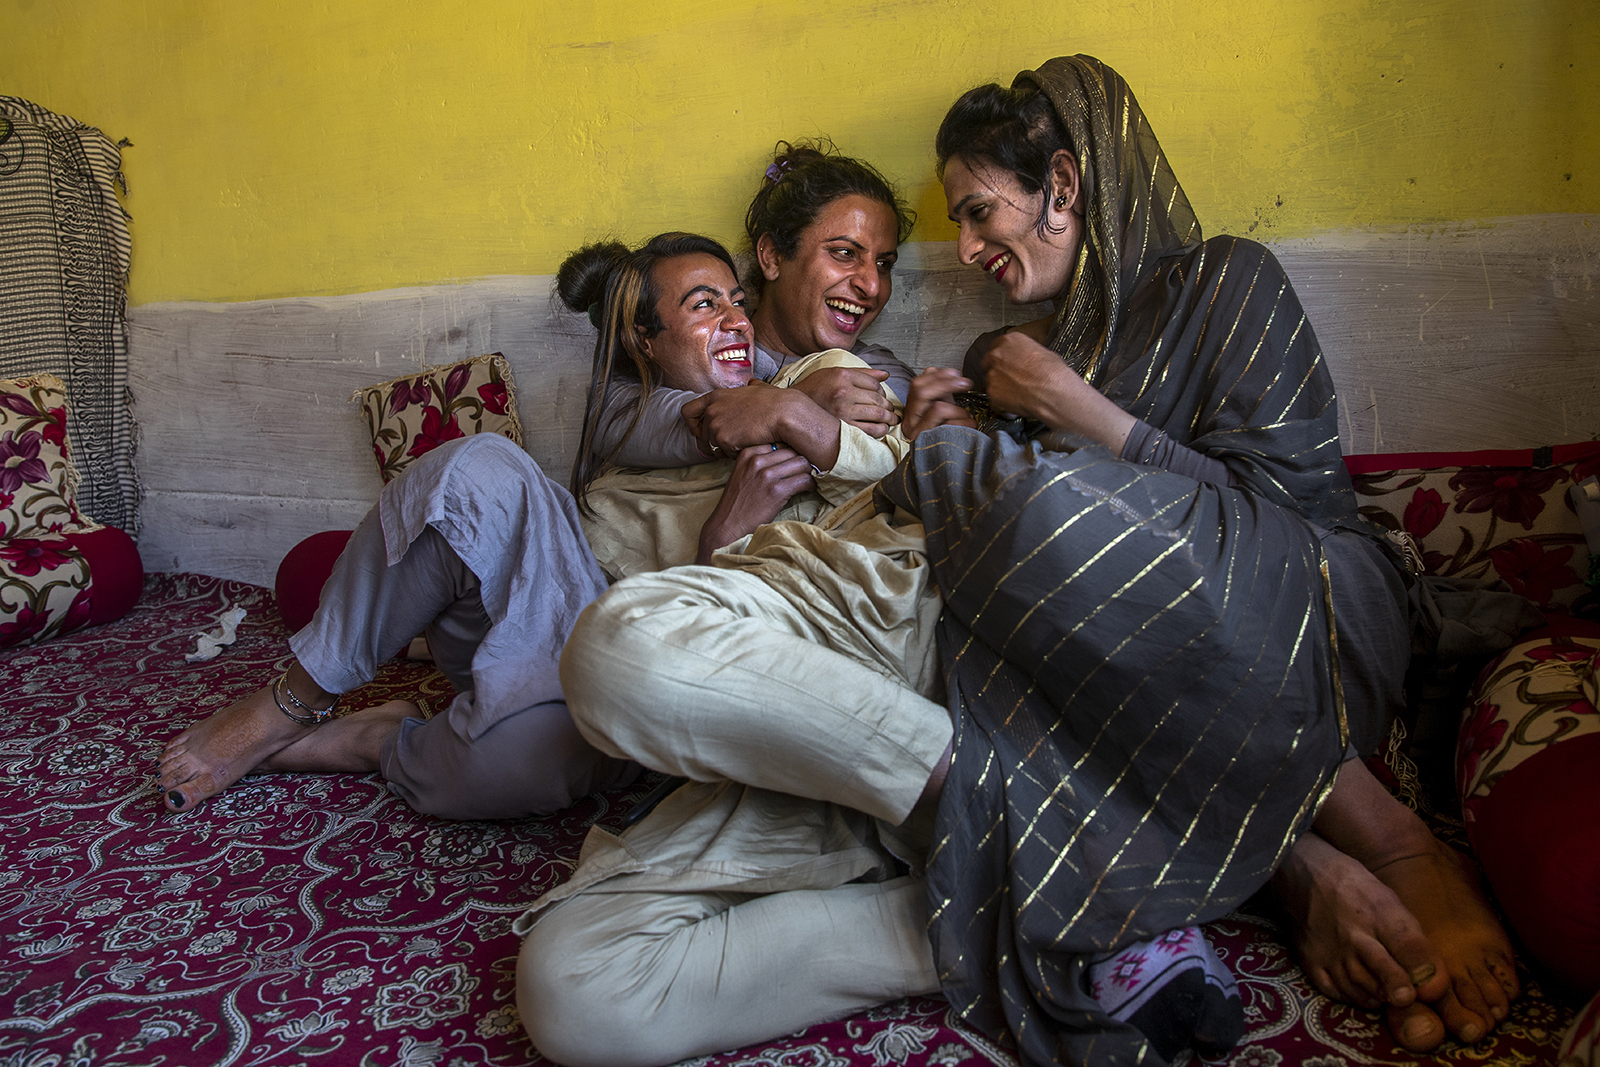 Khushi Mir, left, a transgender Kashmiri, relaxes with friends after a meeting of community members in the outskirts of Srinagar, Indian controlled Kashmir, on June 4, 2021. Mir and four others created a volunteer group to distribute food. They provided ration kits for hundreds of people, many of them makeup artists, singers and matchmakers who have lost their livelihoods during the pandemic. (AP Photo/Dar Yasin)